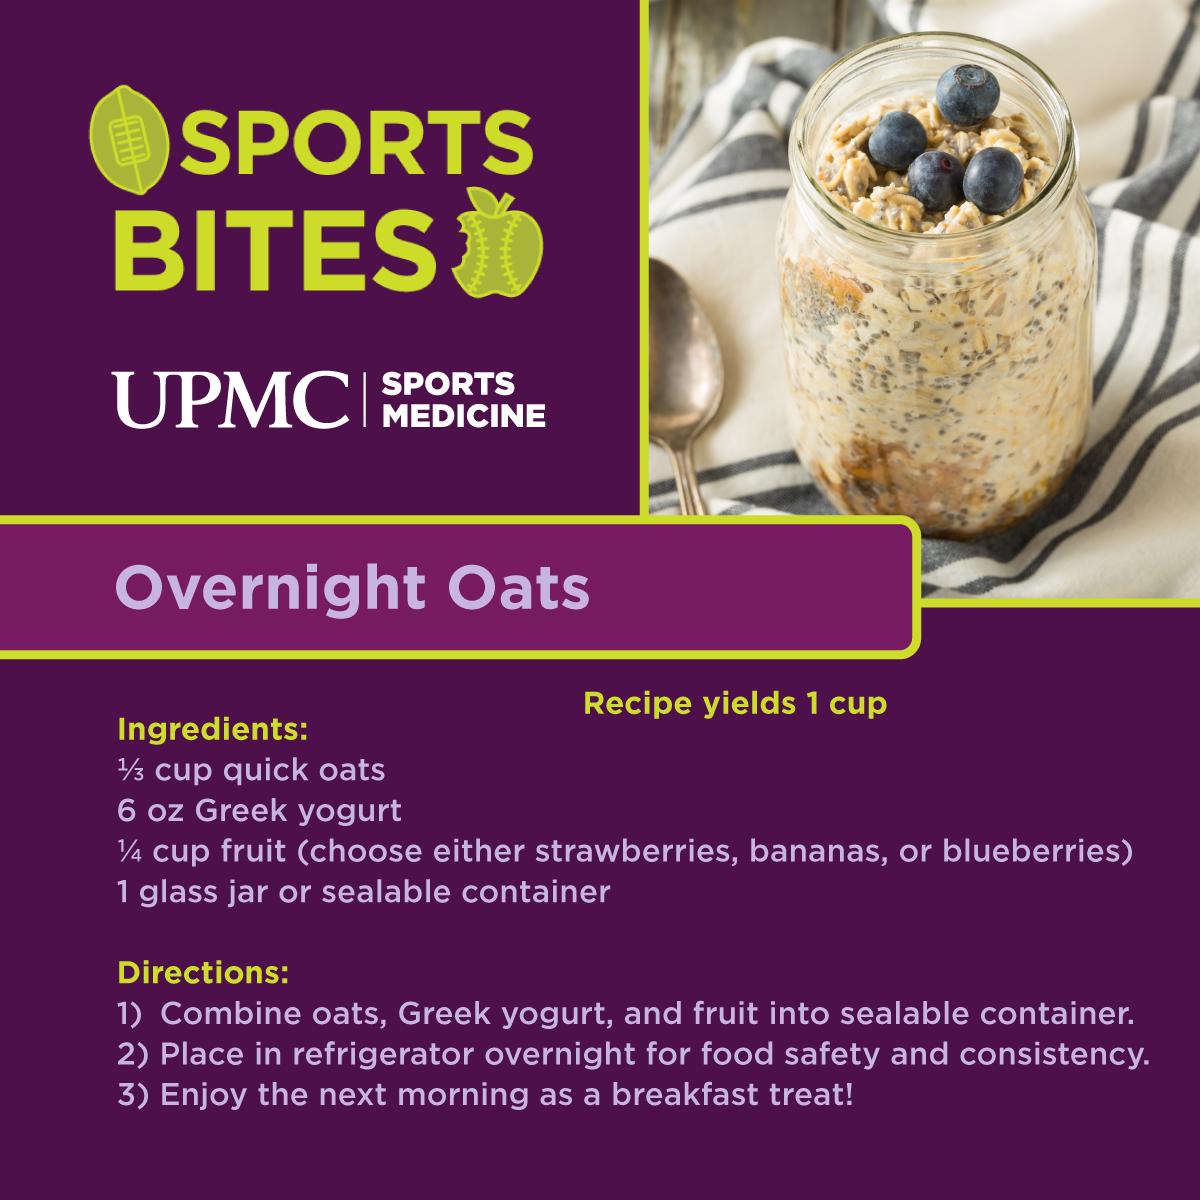 Learn more about how to make overnight oats